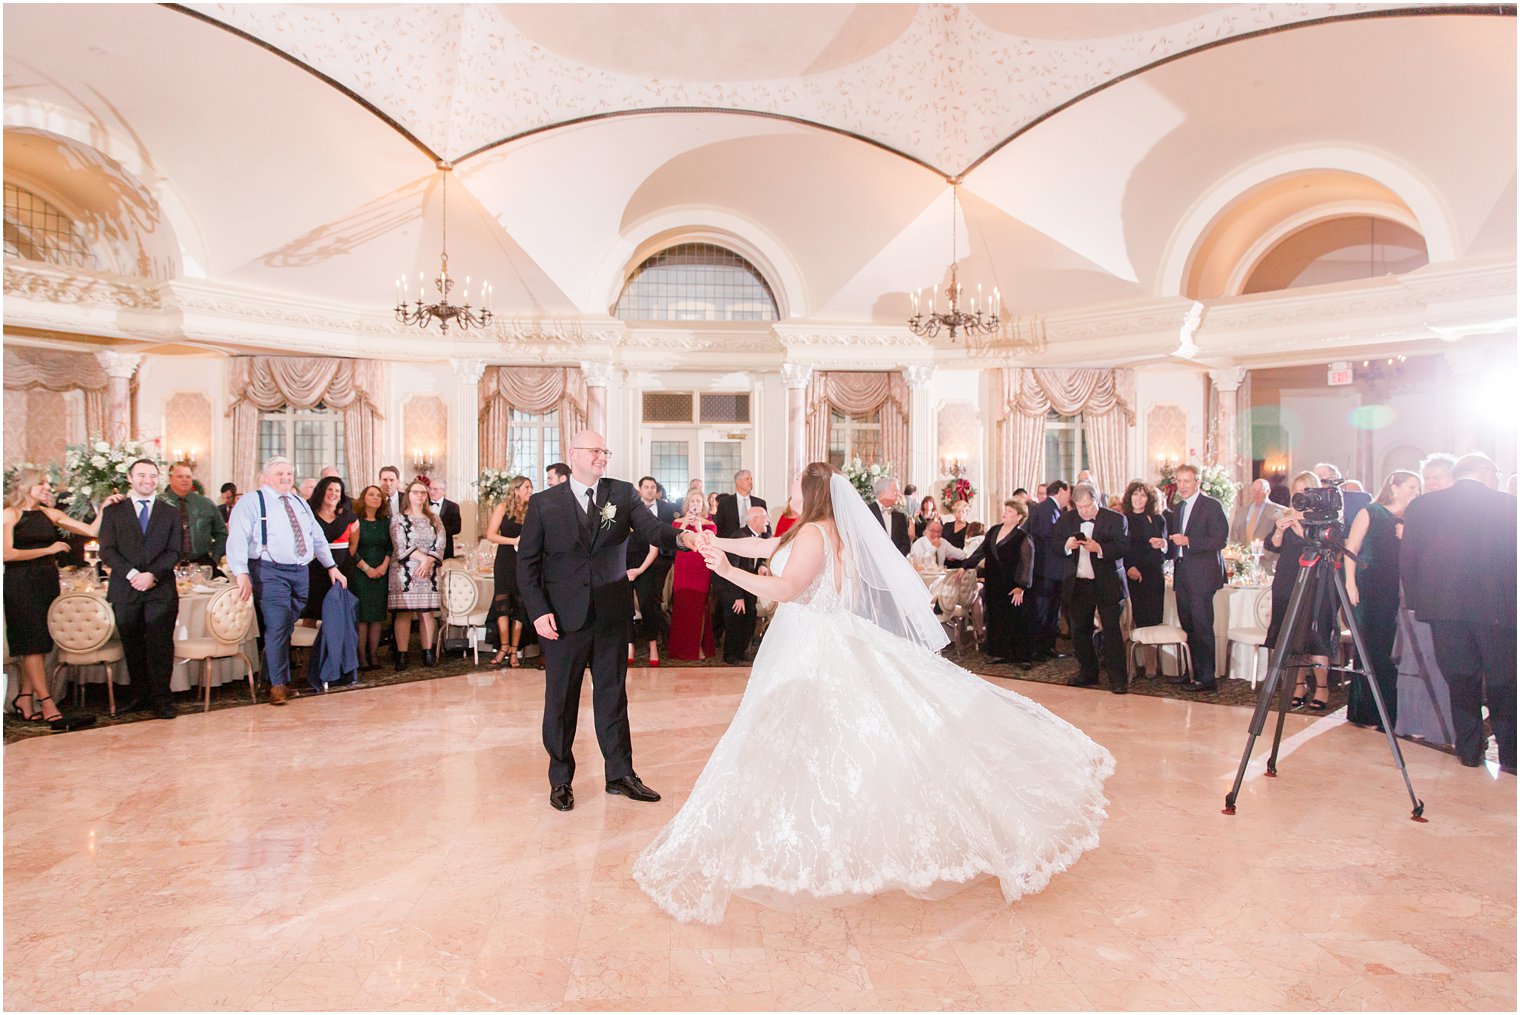 bride and groom's first dance during their wedding reception at Pleasantdale Chateau